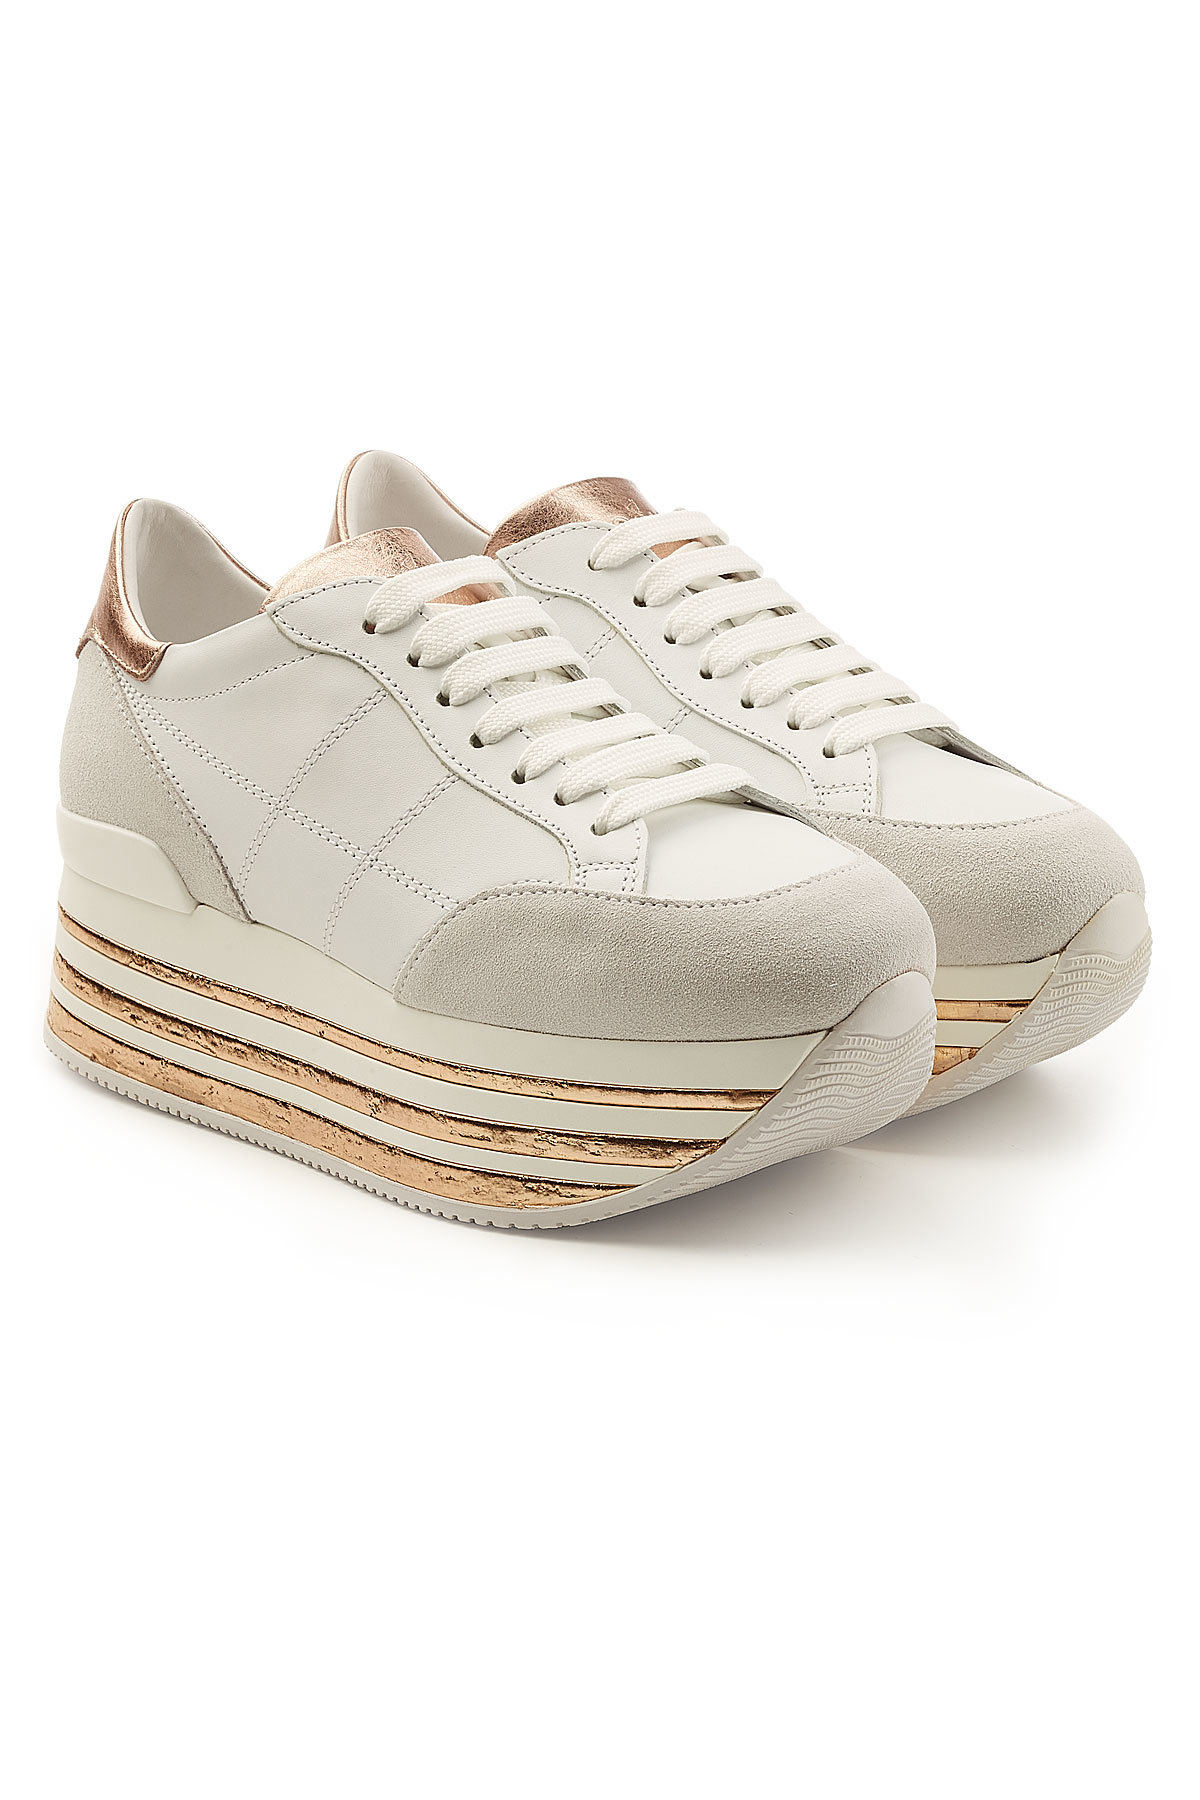 Hogan - Maxi H222 Platform Sneakers with Leather and Suede